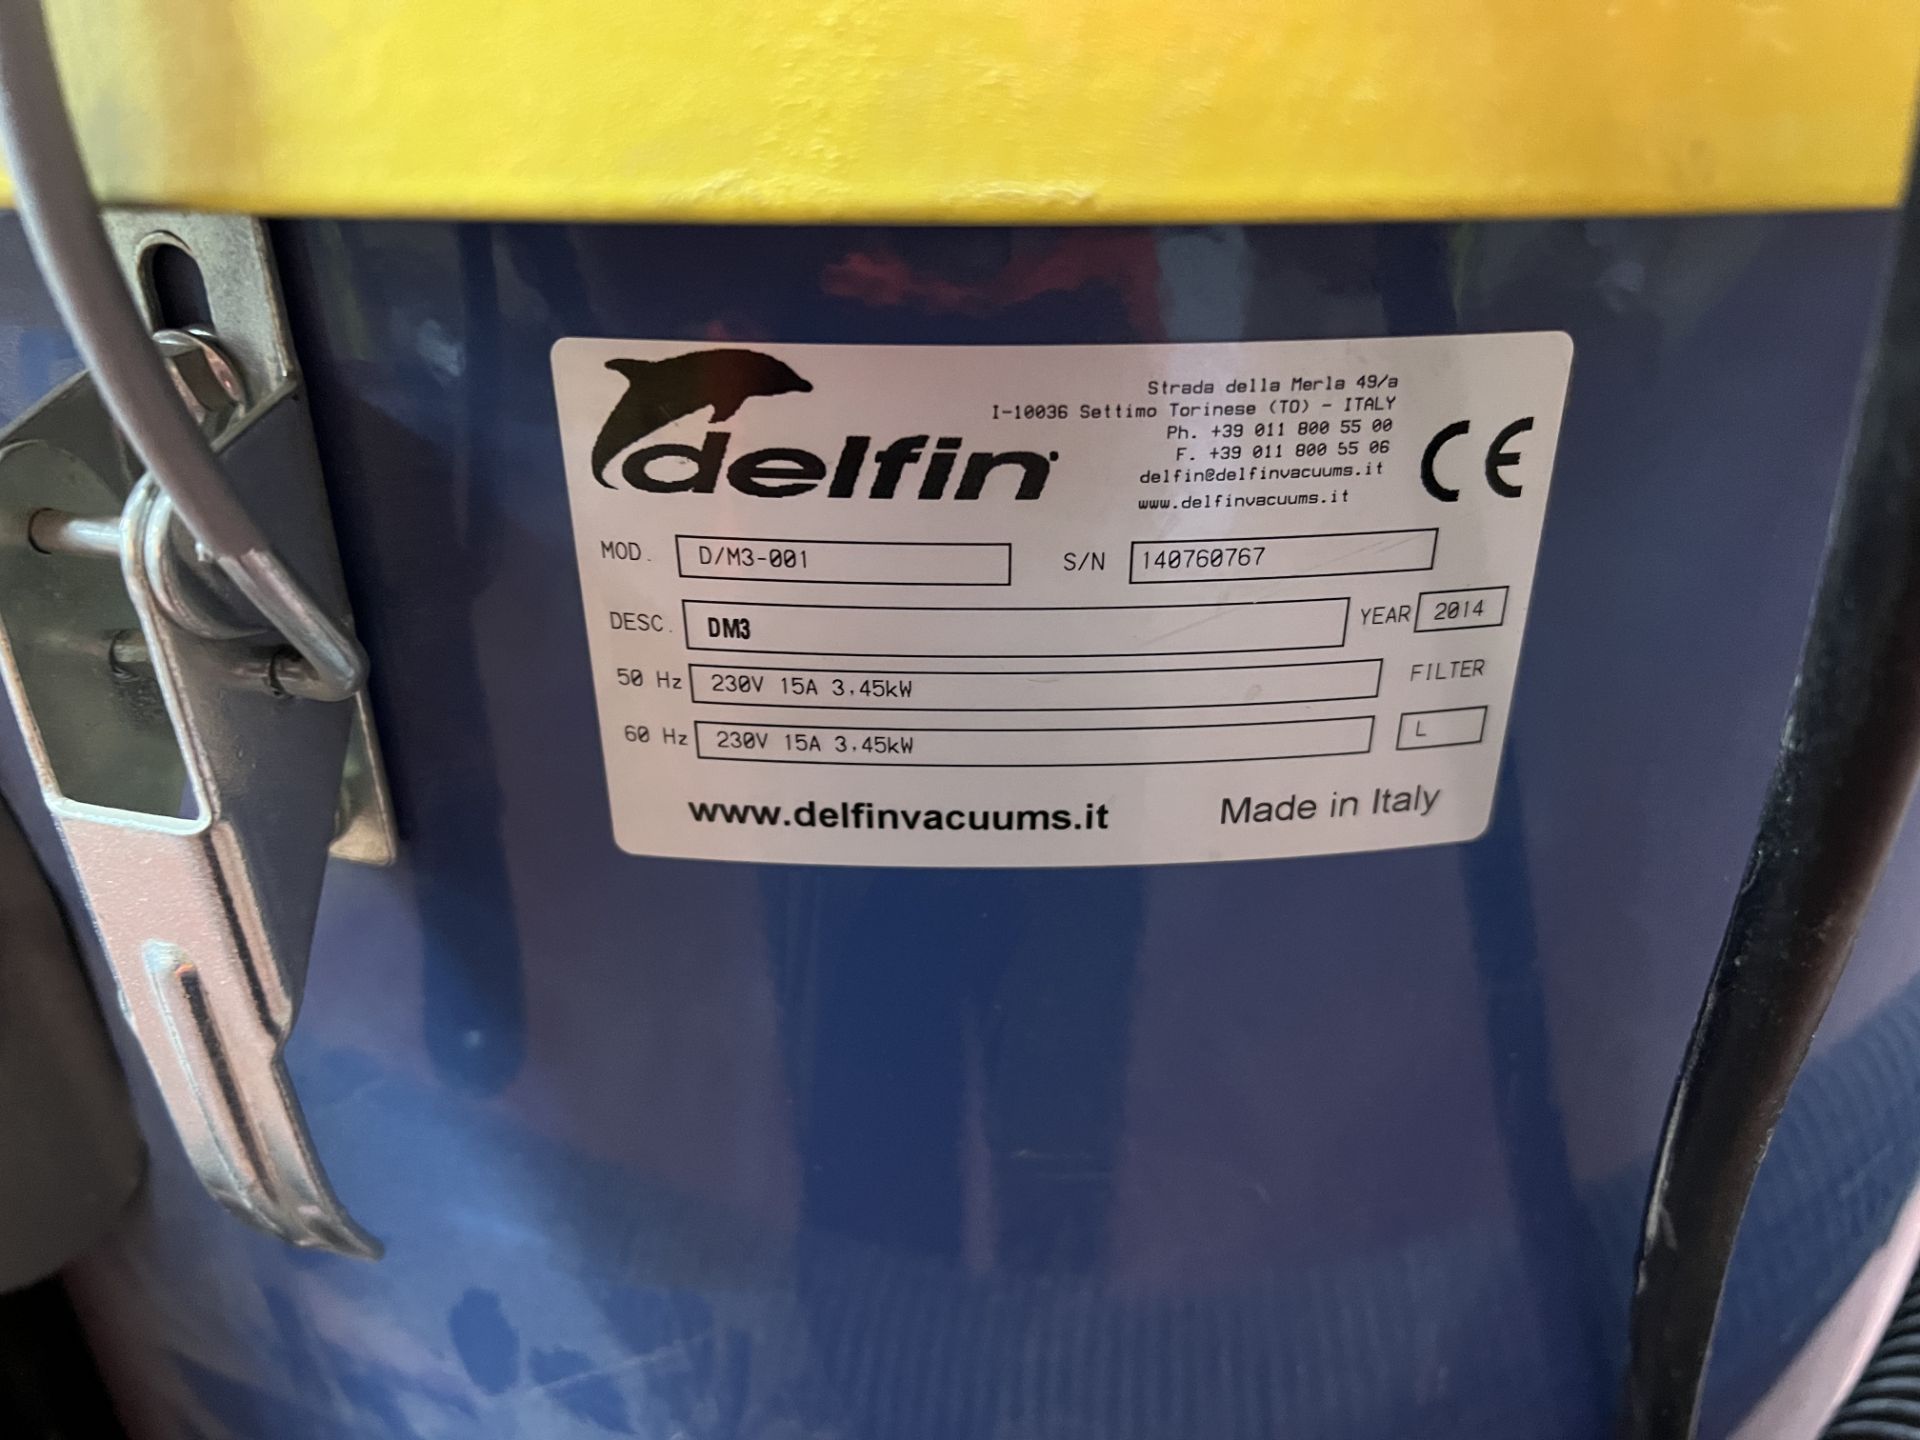 Delfin D/M3-001 mobile dust extractor with L filter fitted, 230 volts, 3.45 Kw, S/No. 140760767, DOM - Image 4 of 5